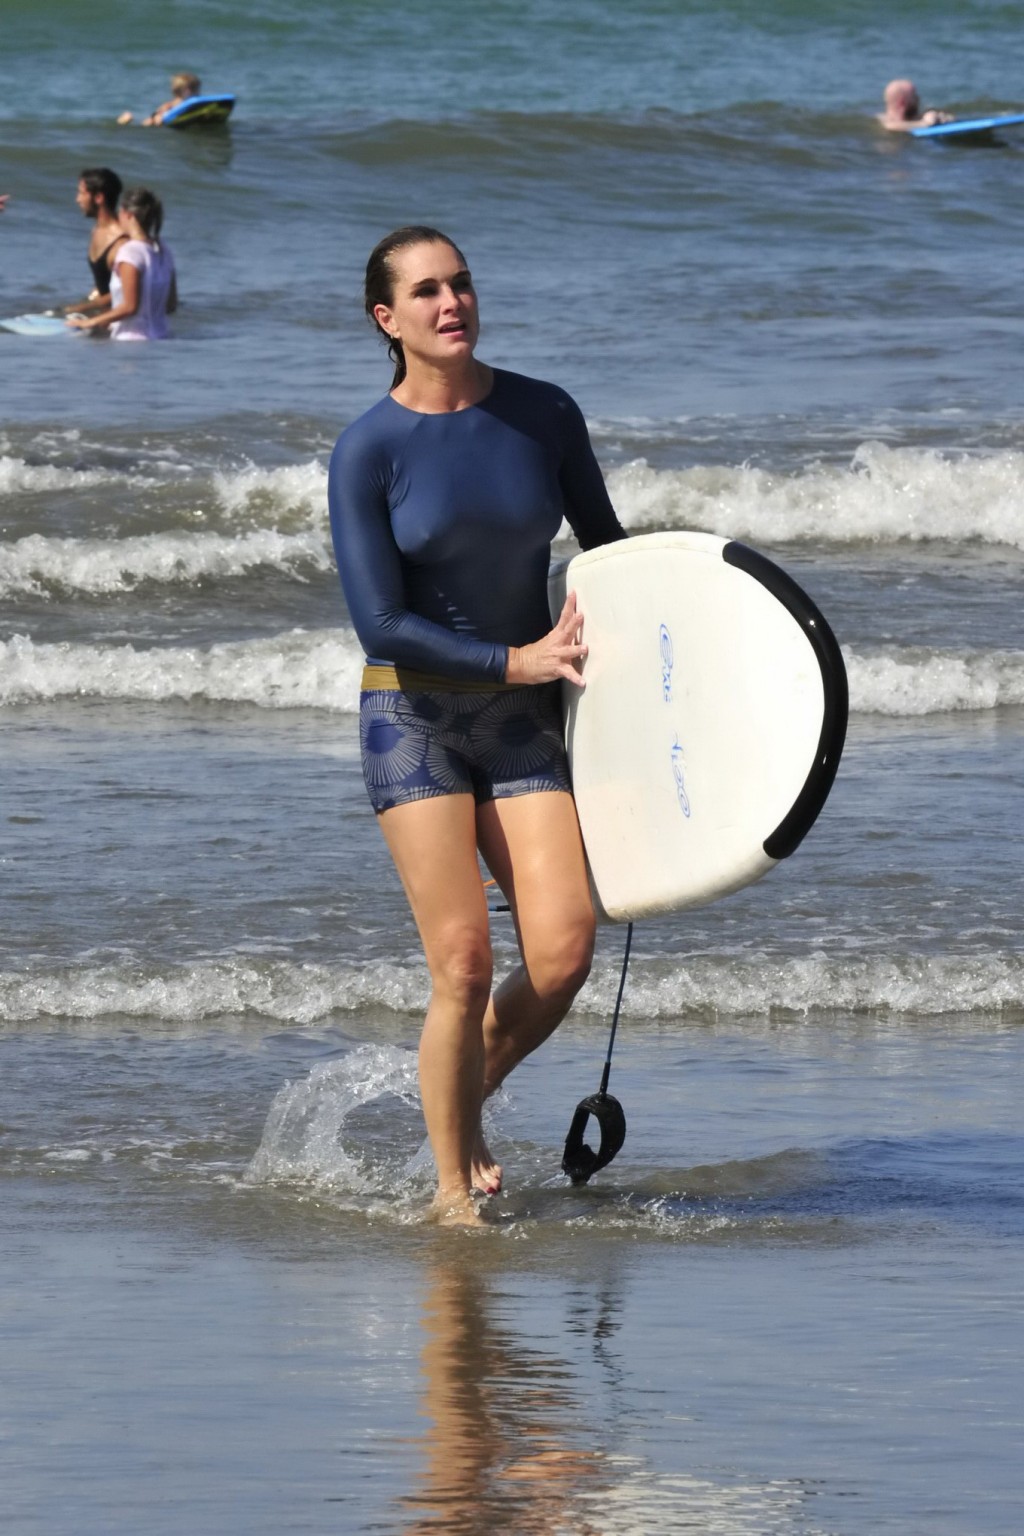 Brooke Shields busty showing her nipple pokies while surfing at the beach in Cos #75169684